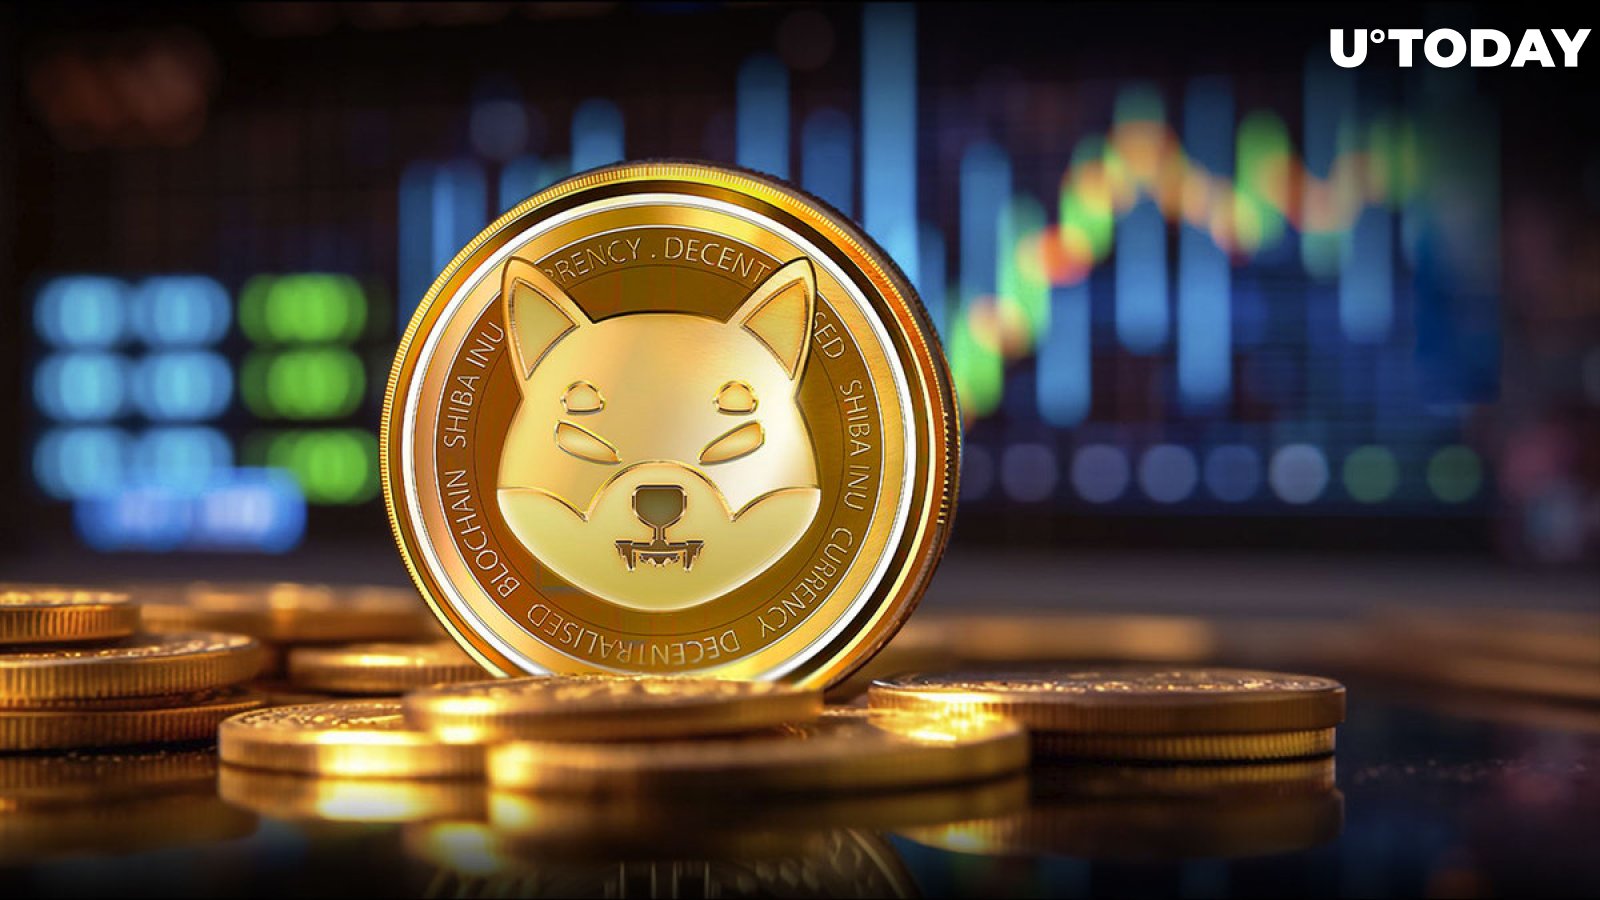 Shiba Inu (SHIB) Price May Skyrocket in July If This Comes True